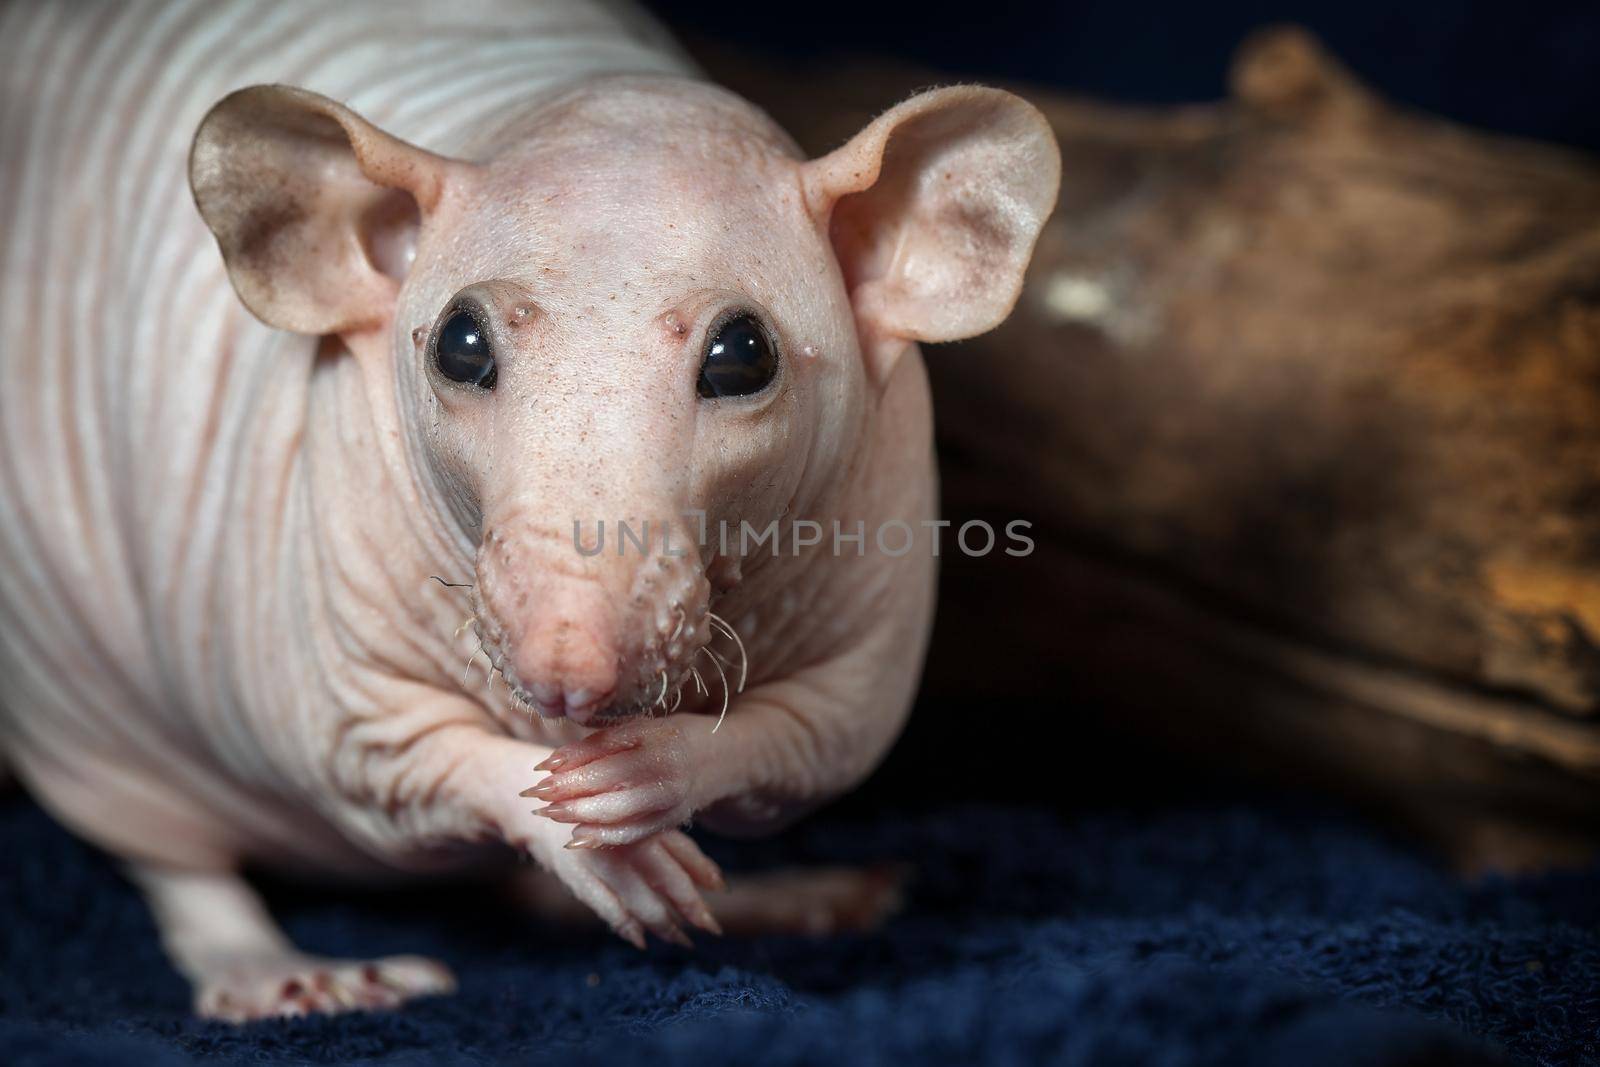 Polite hairless rat posing and looking at the camera. Showing her manicure and natural beauty.